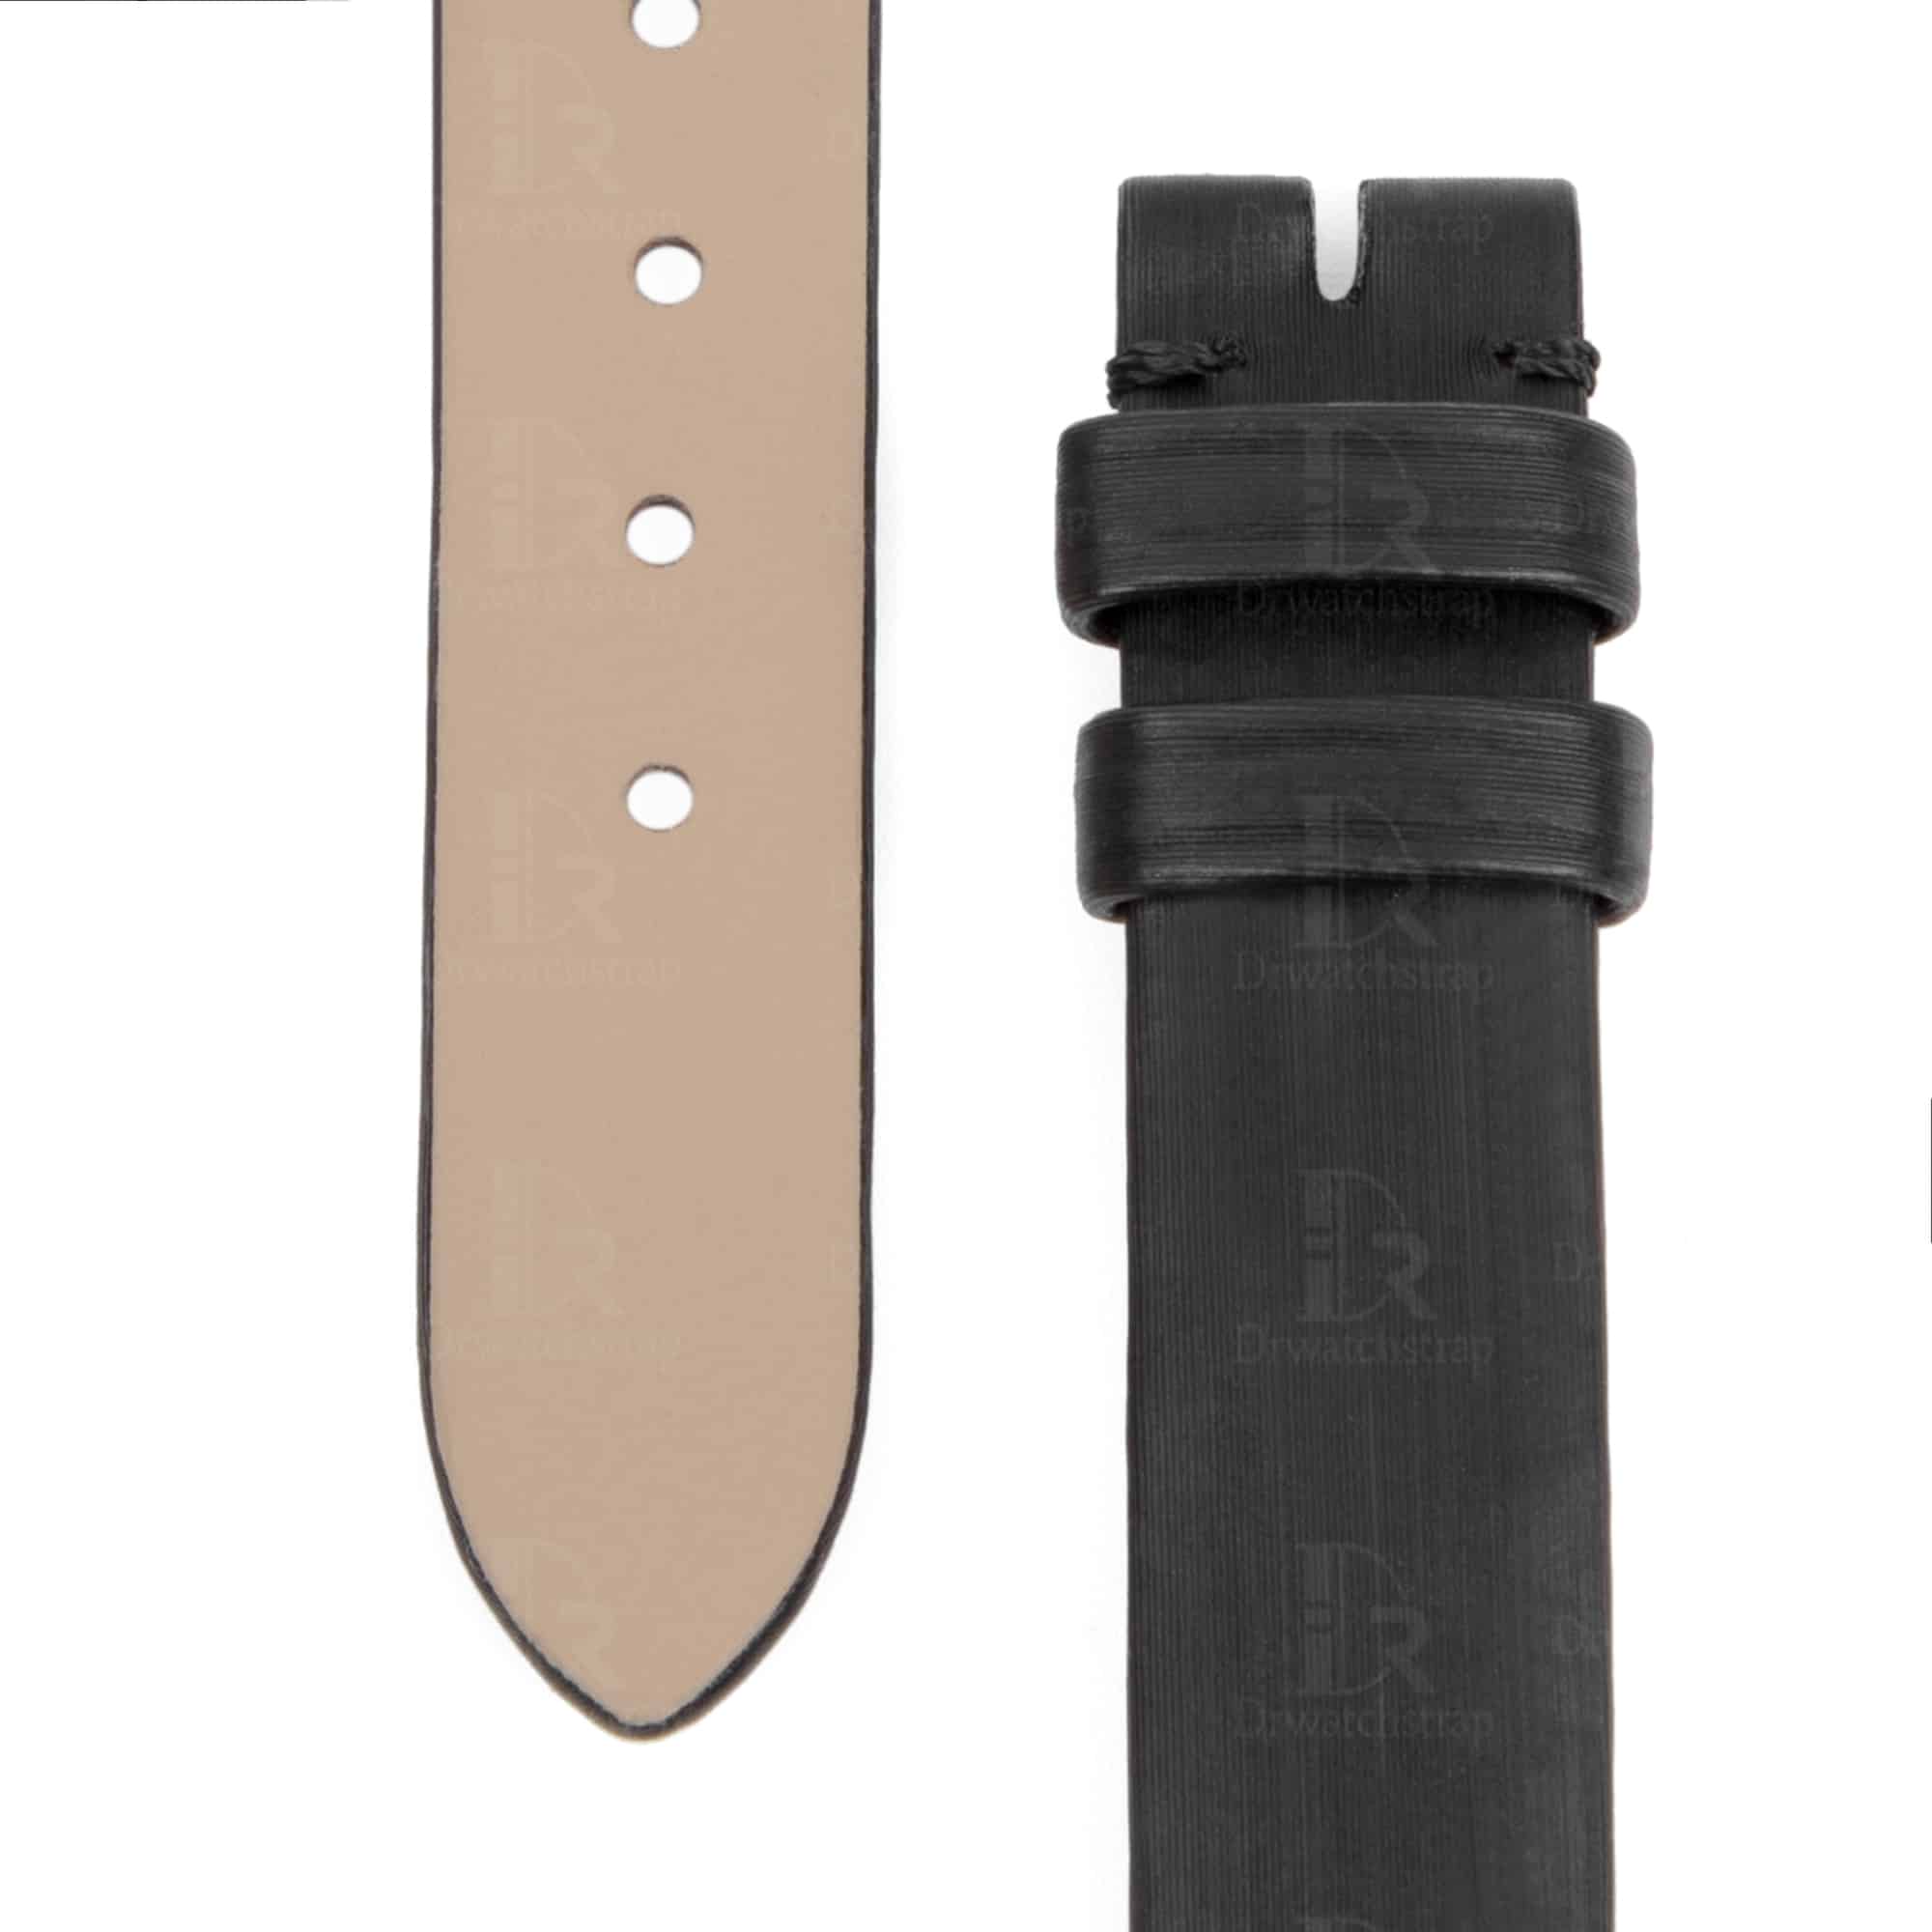 Best quality black Satin Cartier Baignoire watch strap replacement watch band for for Cartier Baignoire watches oniline at a low price - Handmade OEM Cartier straps for sale